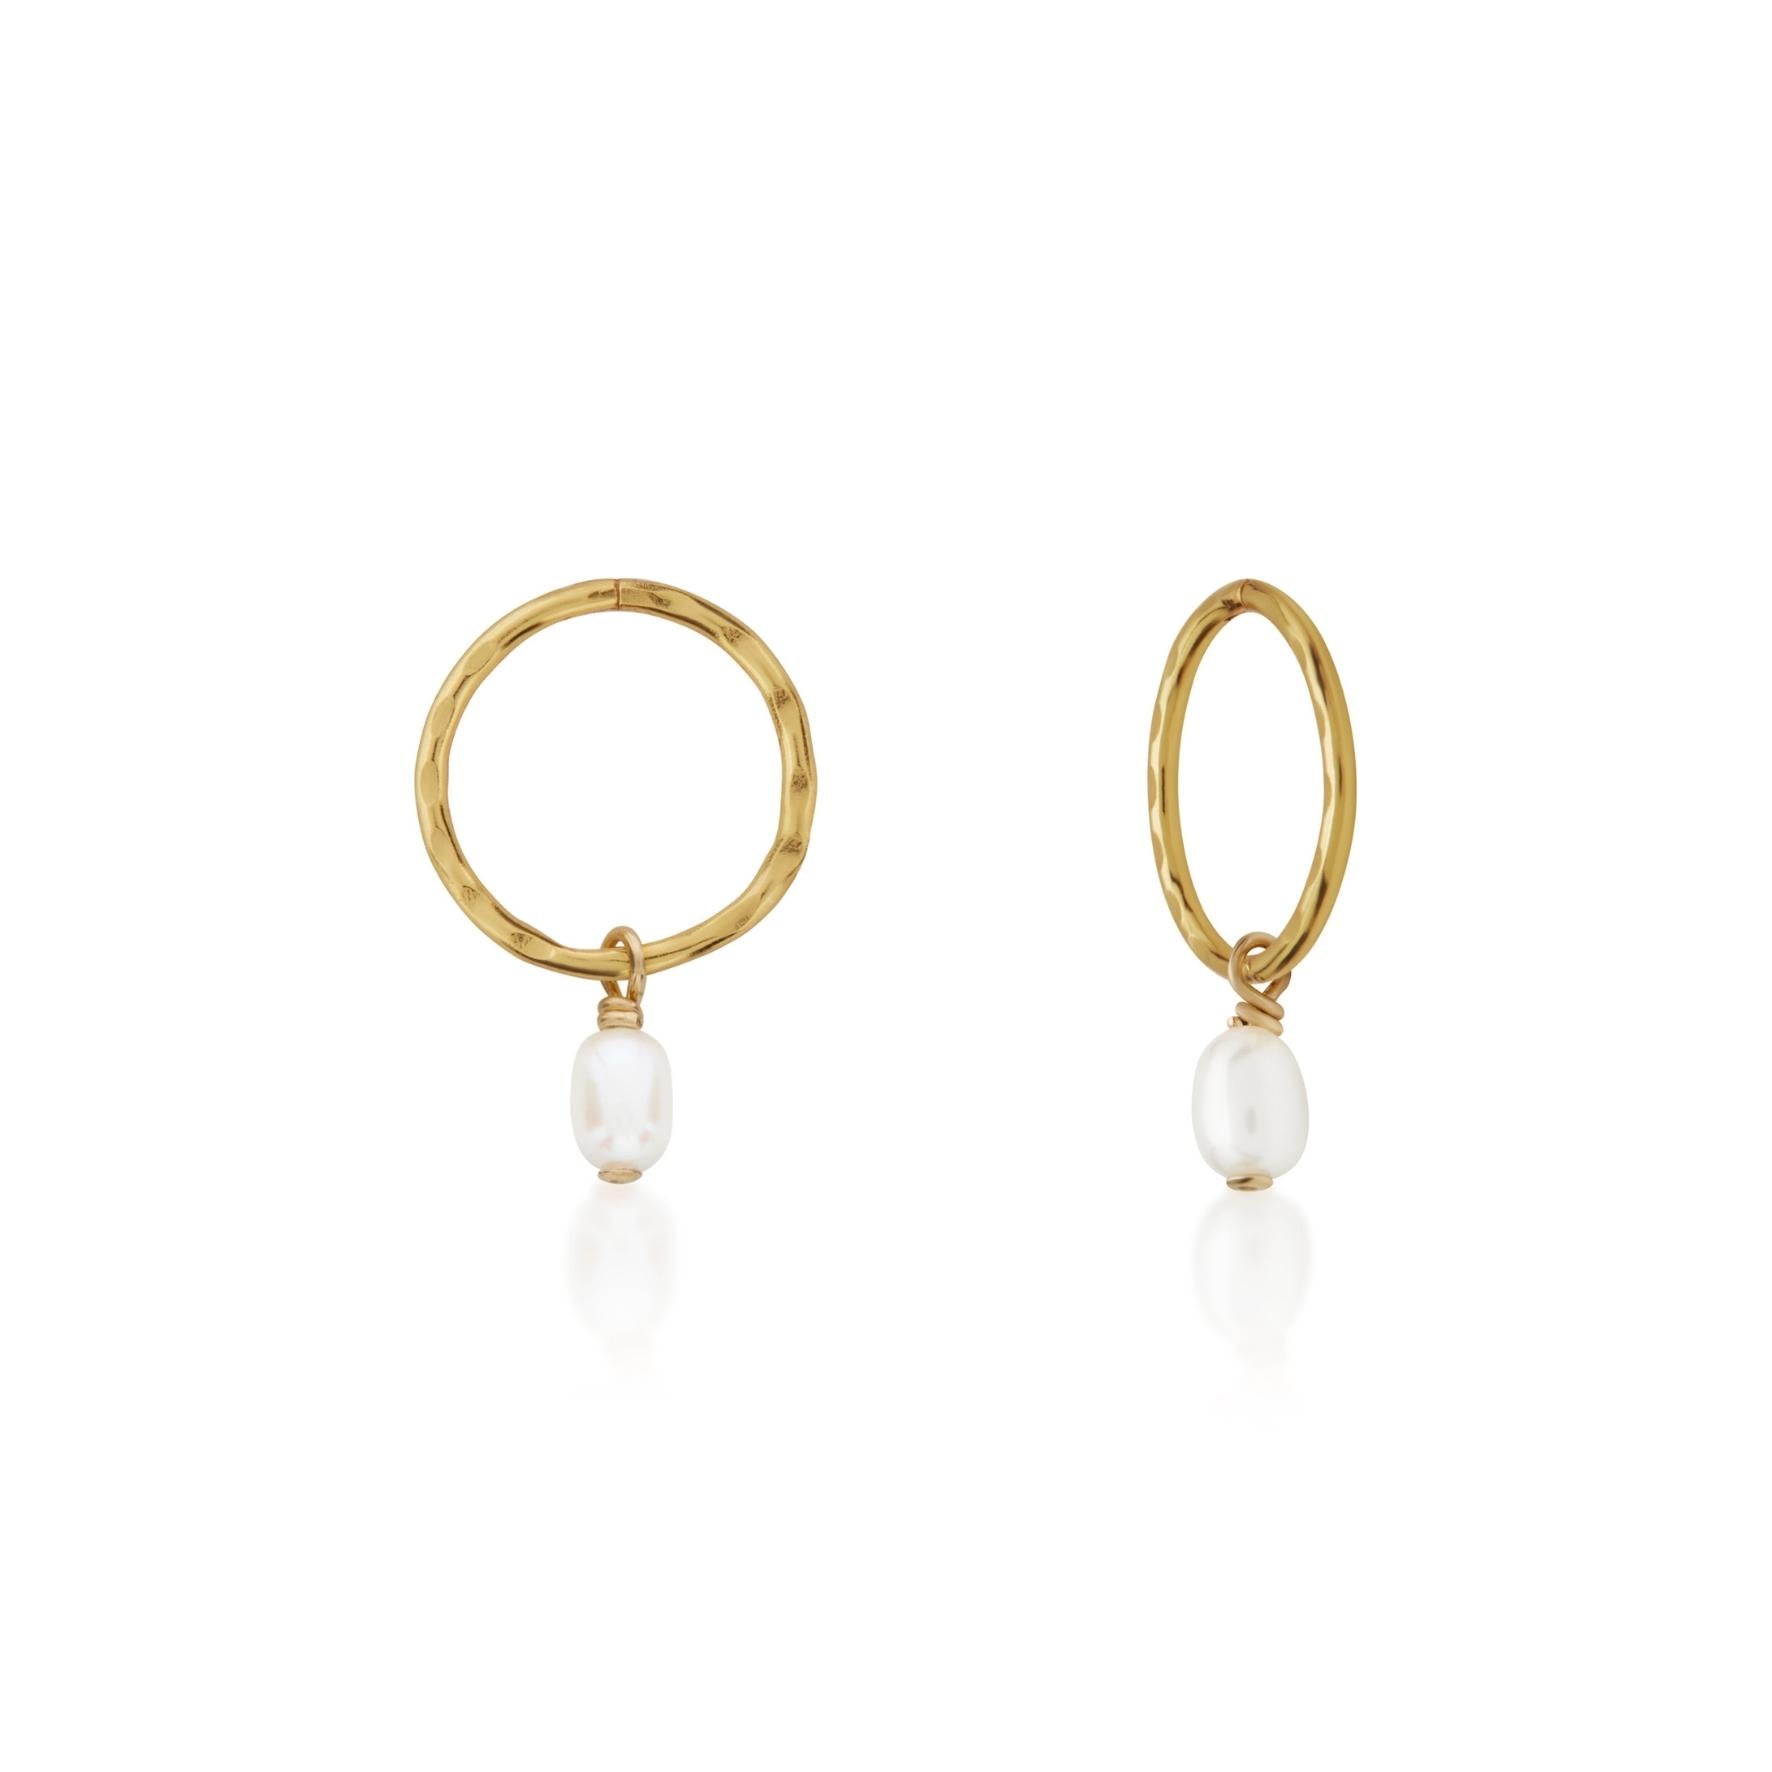 Louis Vuitton Perfect Match Hoop Earrings - 18K Yellow Gold-Plated